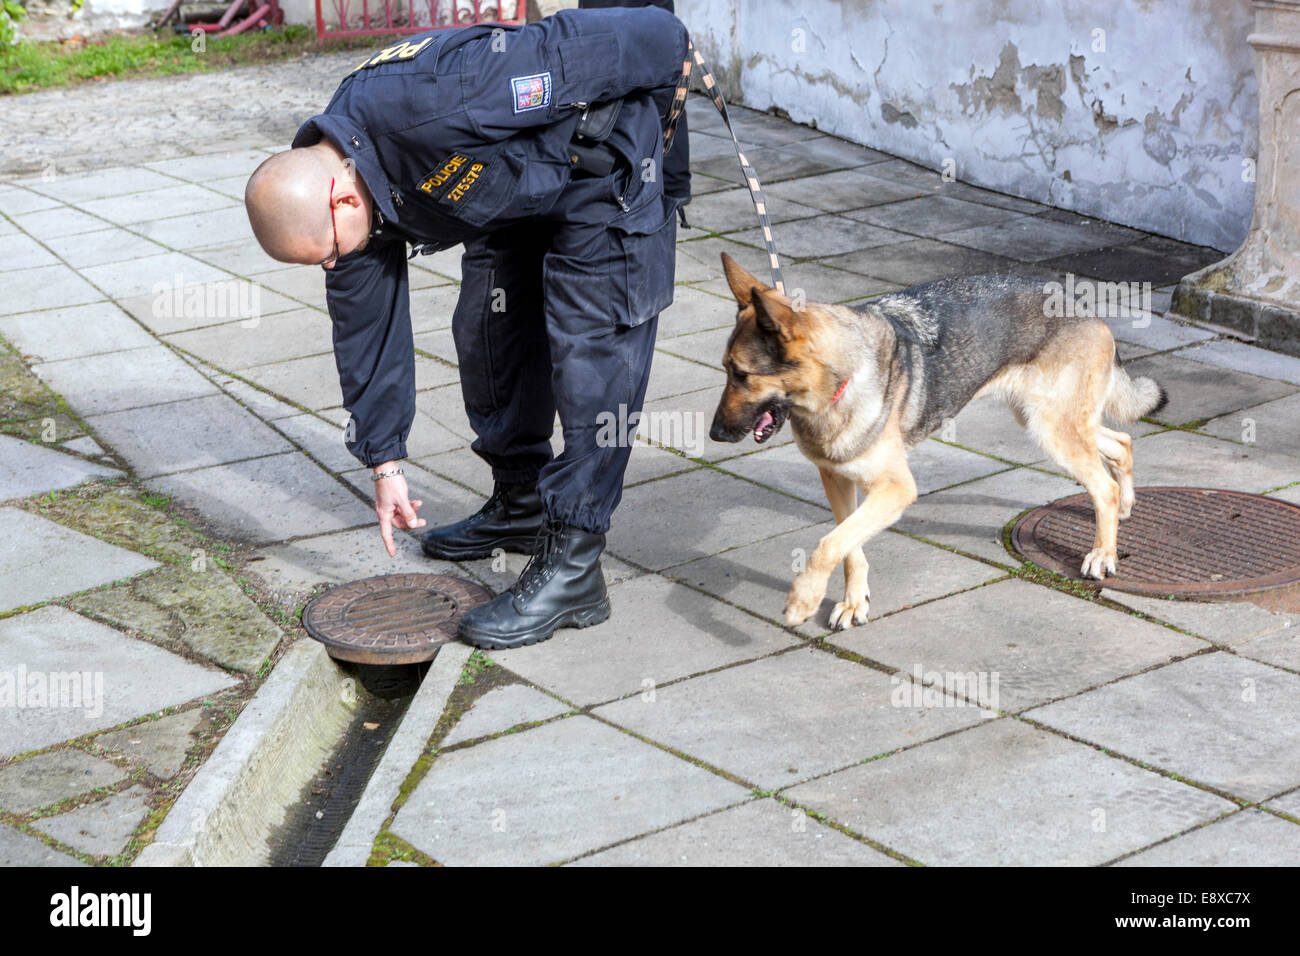 Police dog search explosives, A German shepherd inspects an object,  Police dog sniffing explosives Stock Photo